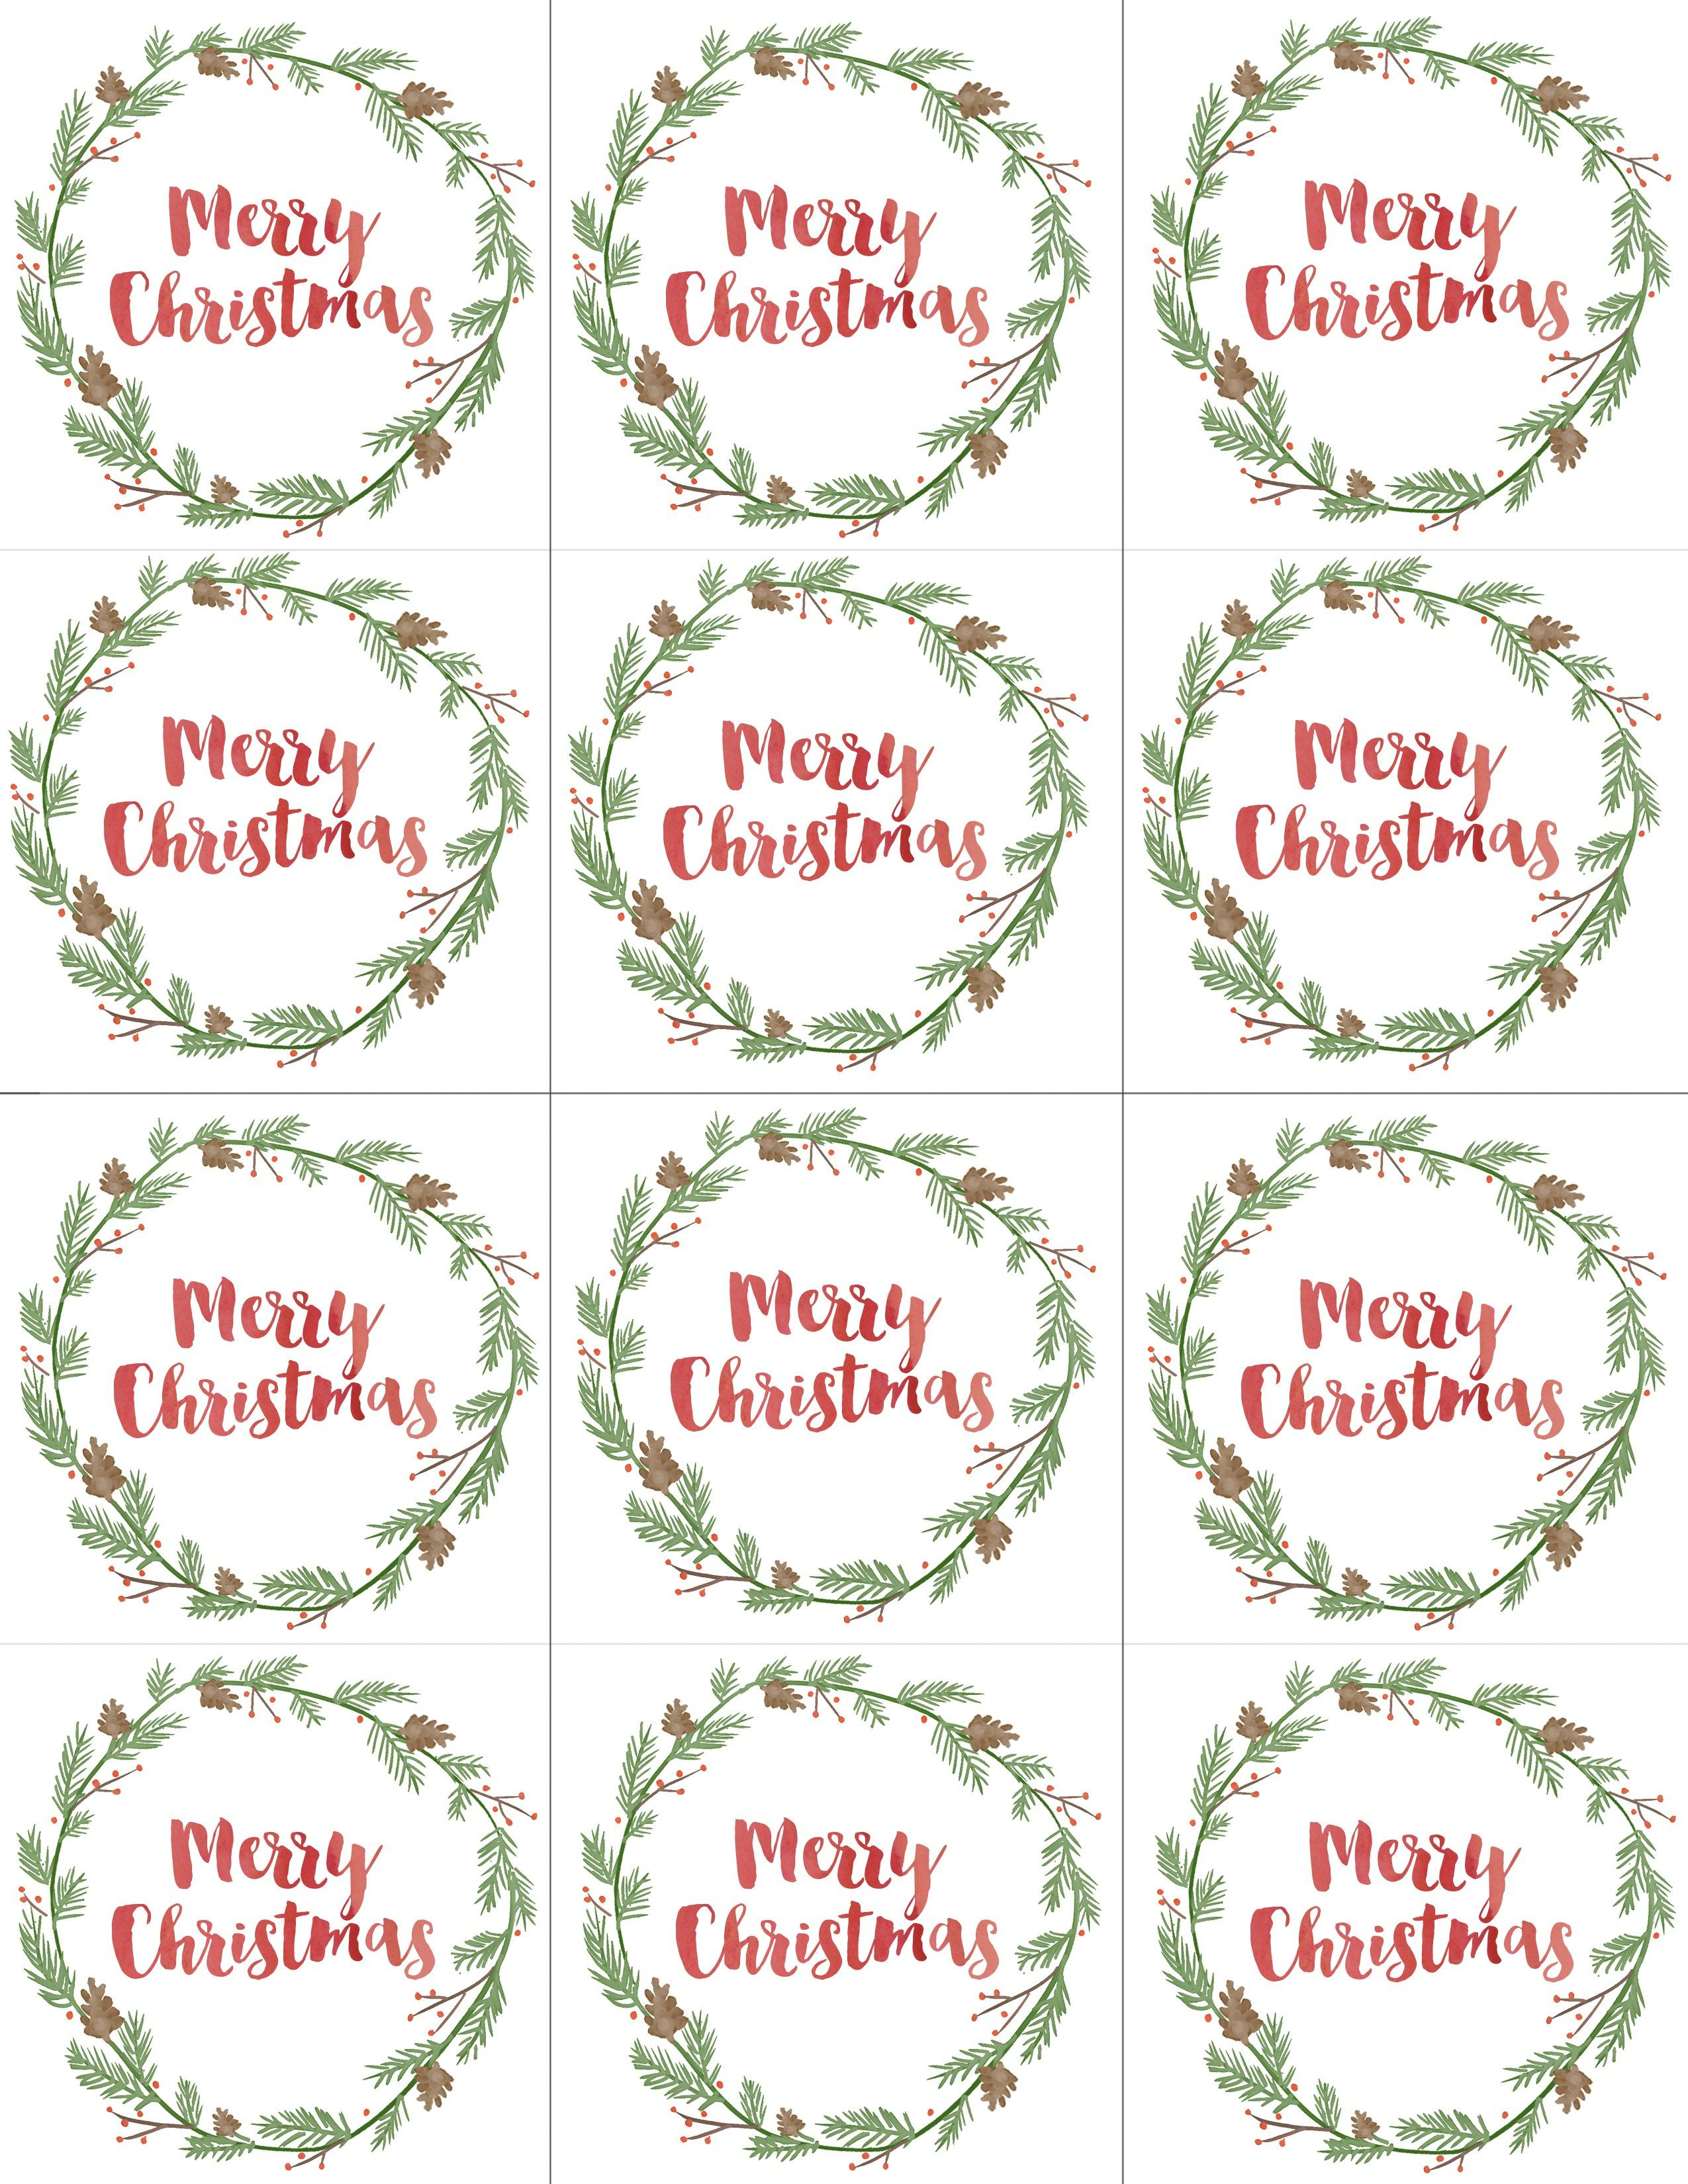 Hand Painted Gift Tags Free Printable | Christmas | Christmas Gift - Diy Christmas Gift Tags Free Printable